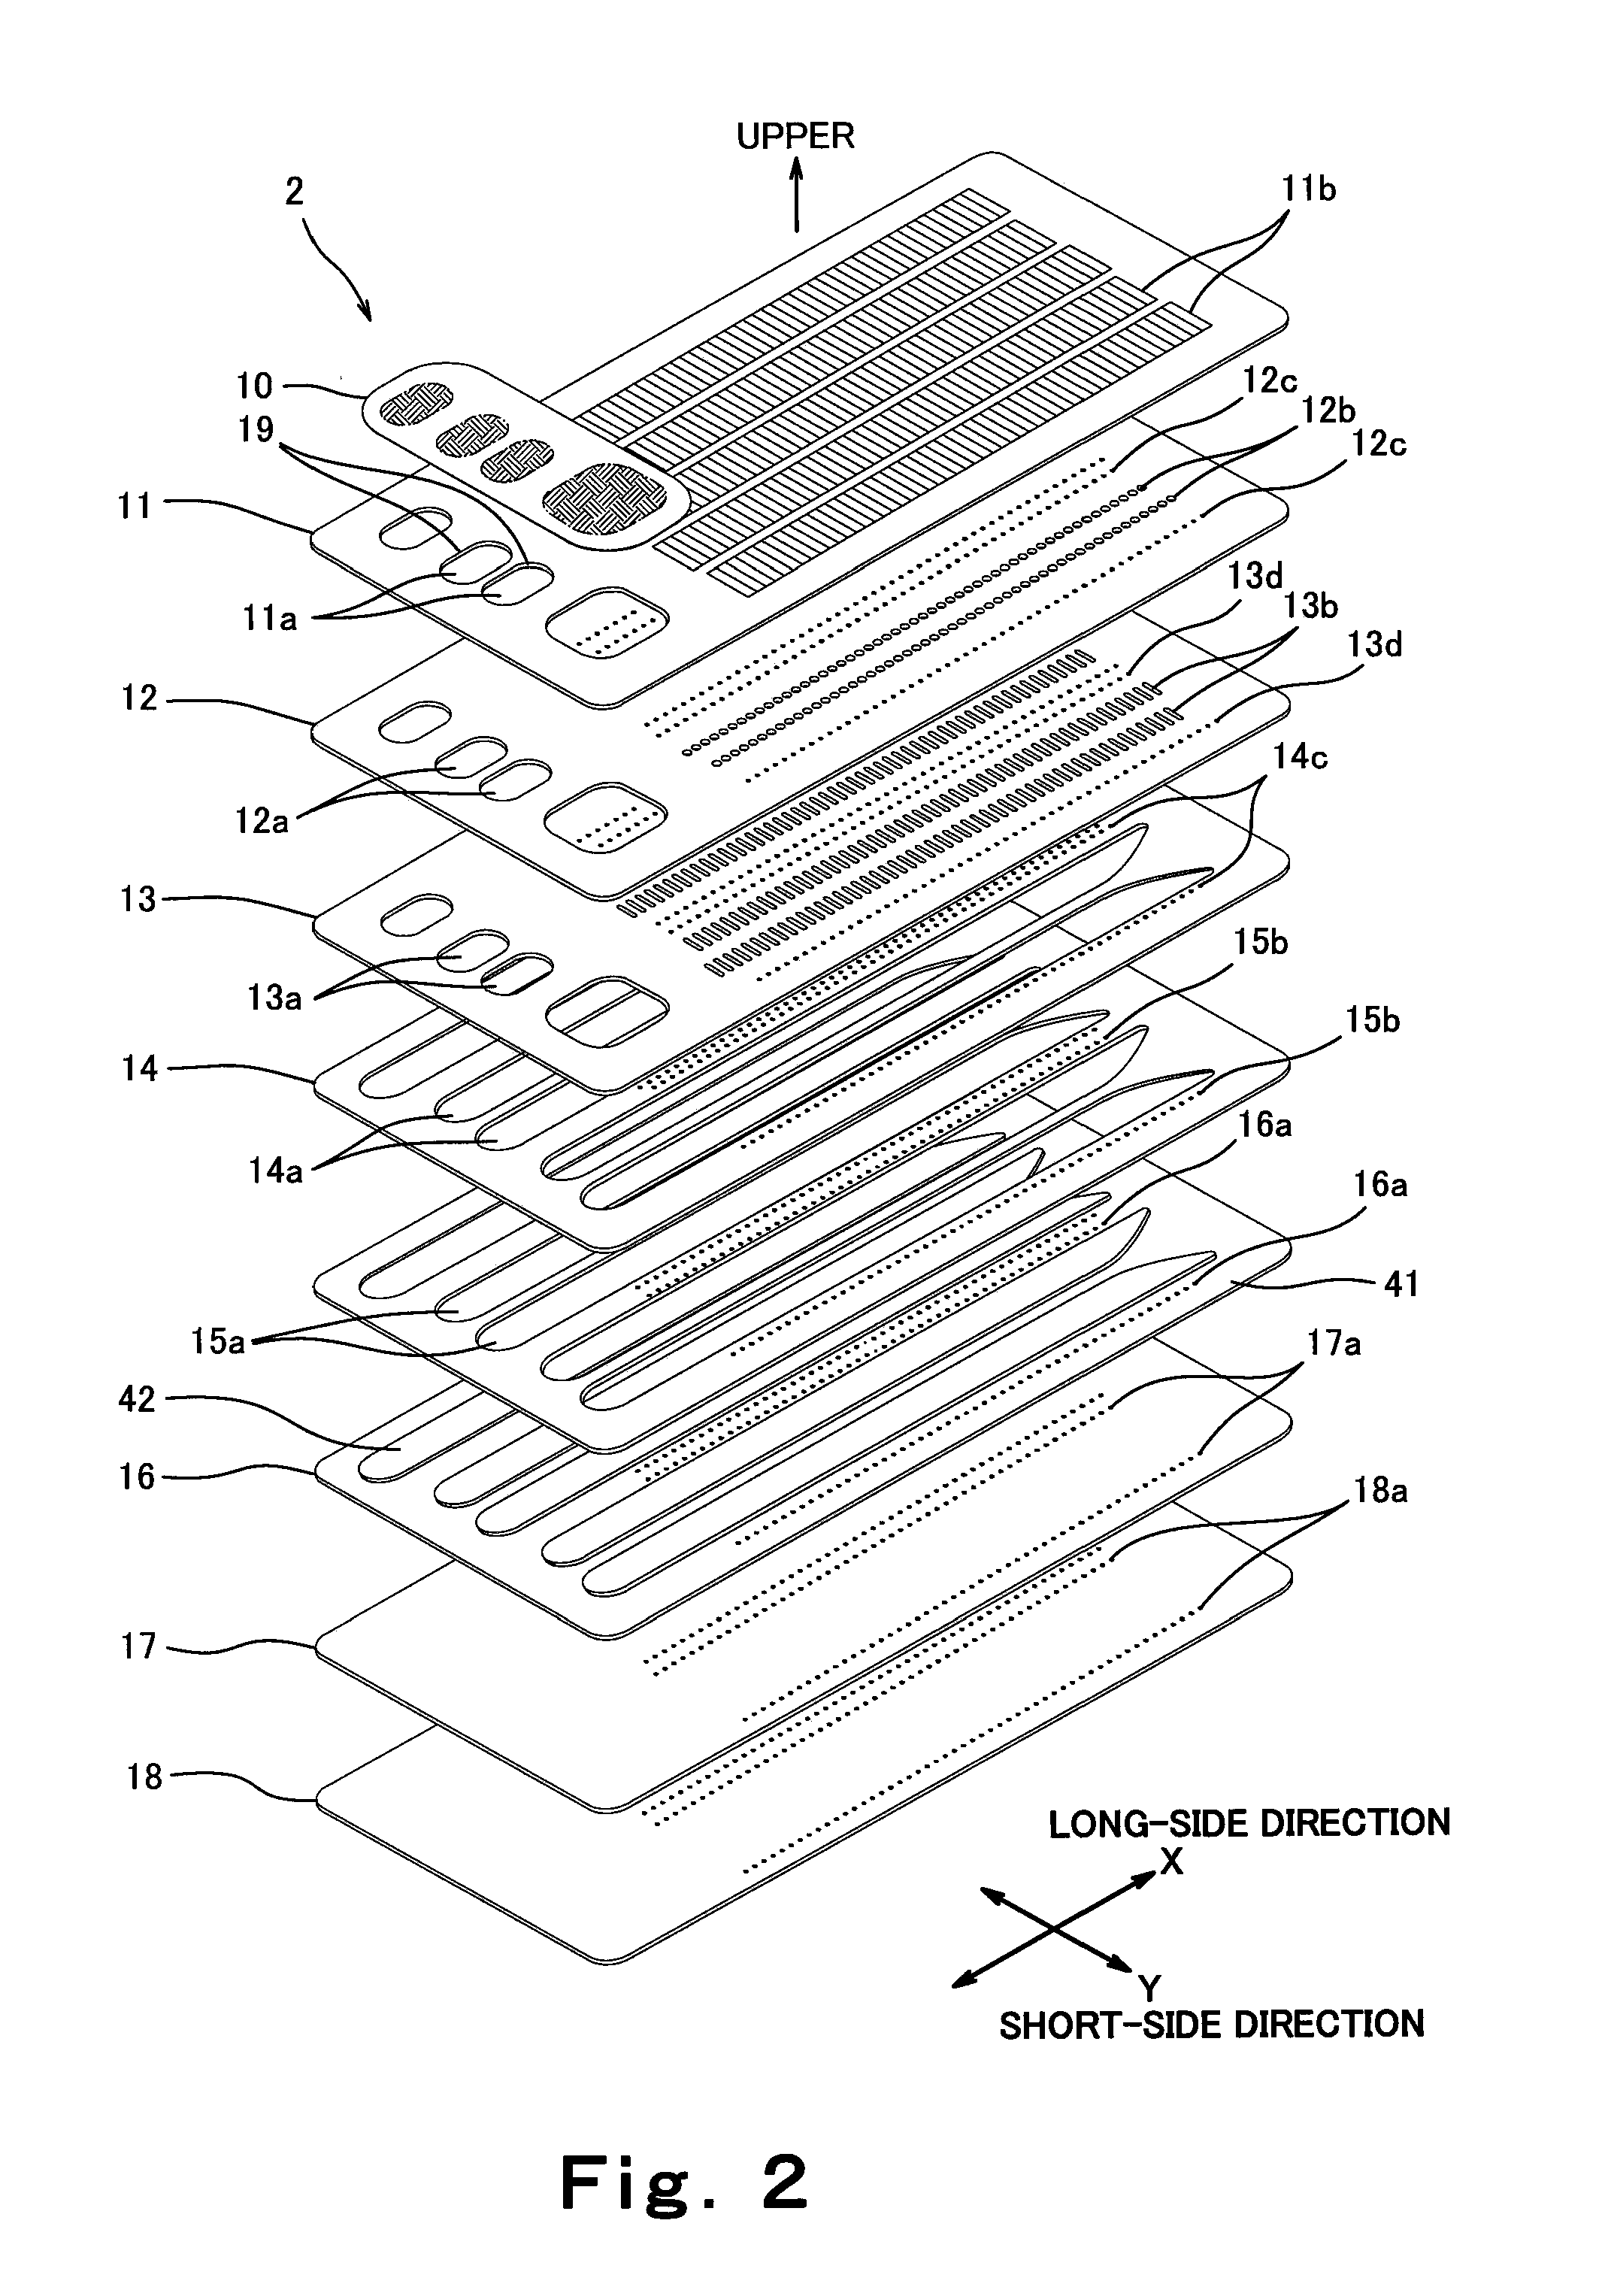 Liquid droplet ejection head and method for manufacturing the same